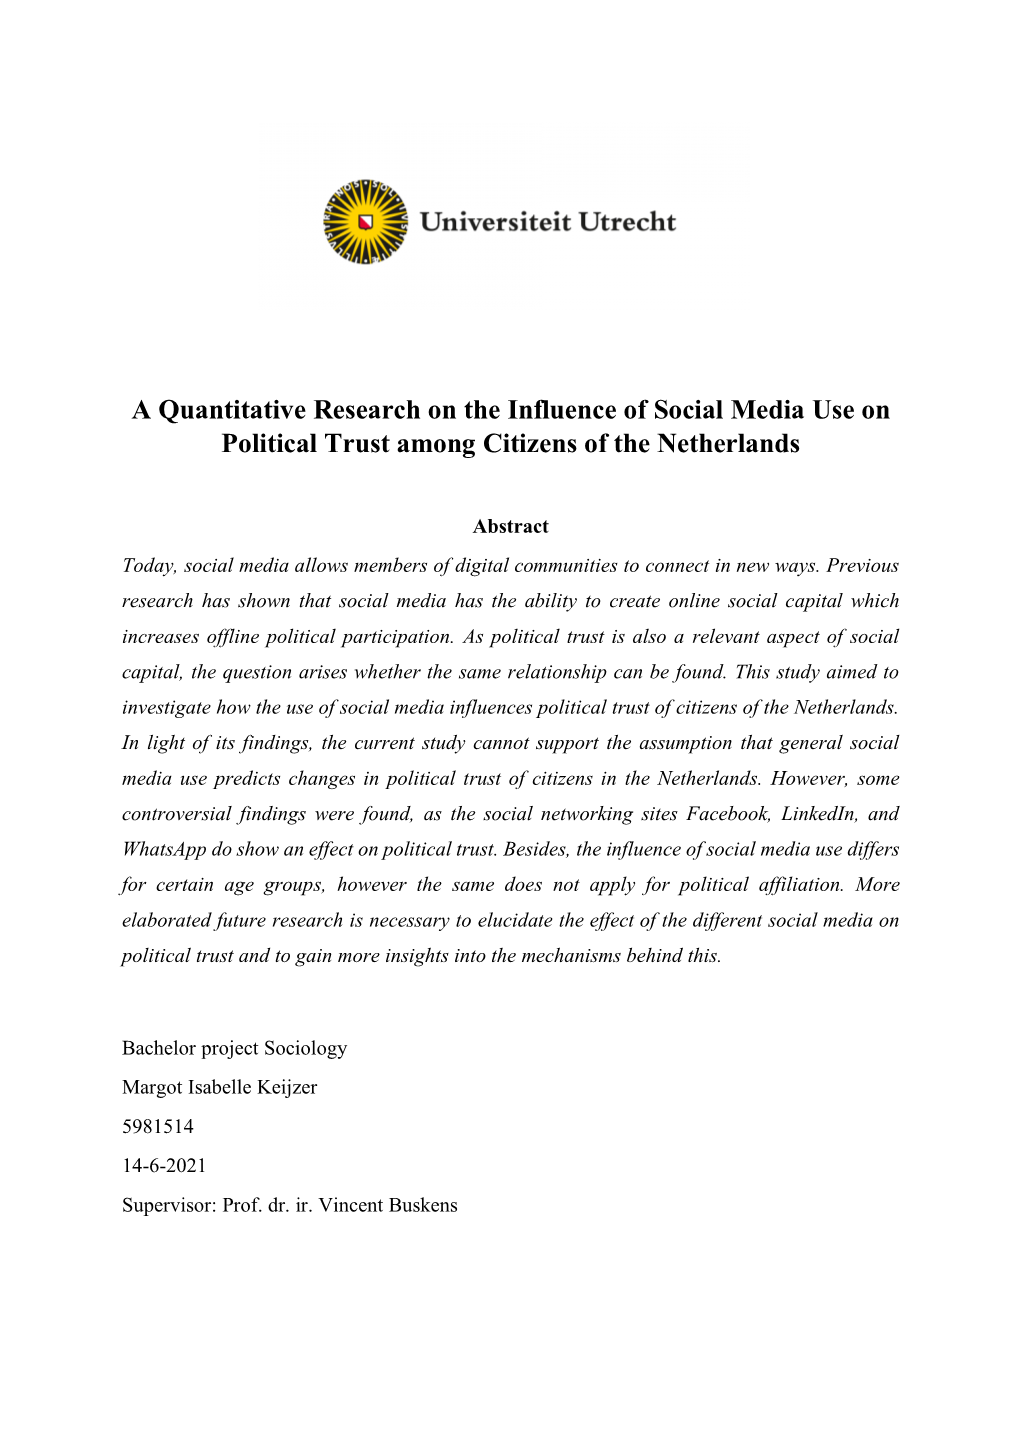 A Quantitative Research on the Influence of Social Media Use on Political Trust Among Citizens of the Netherlands